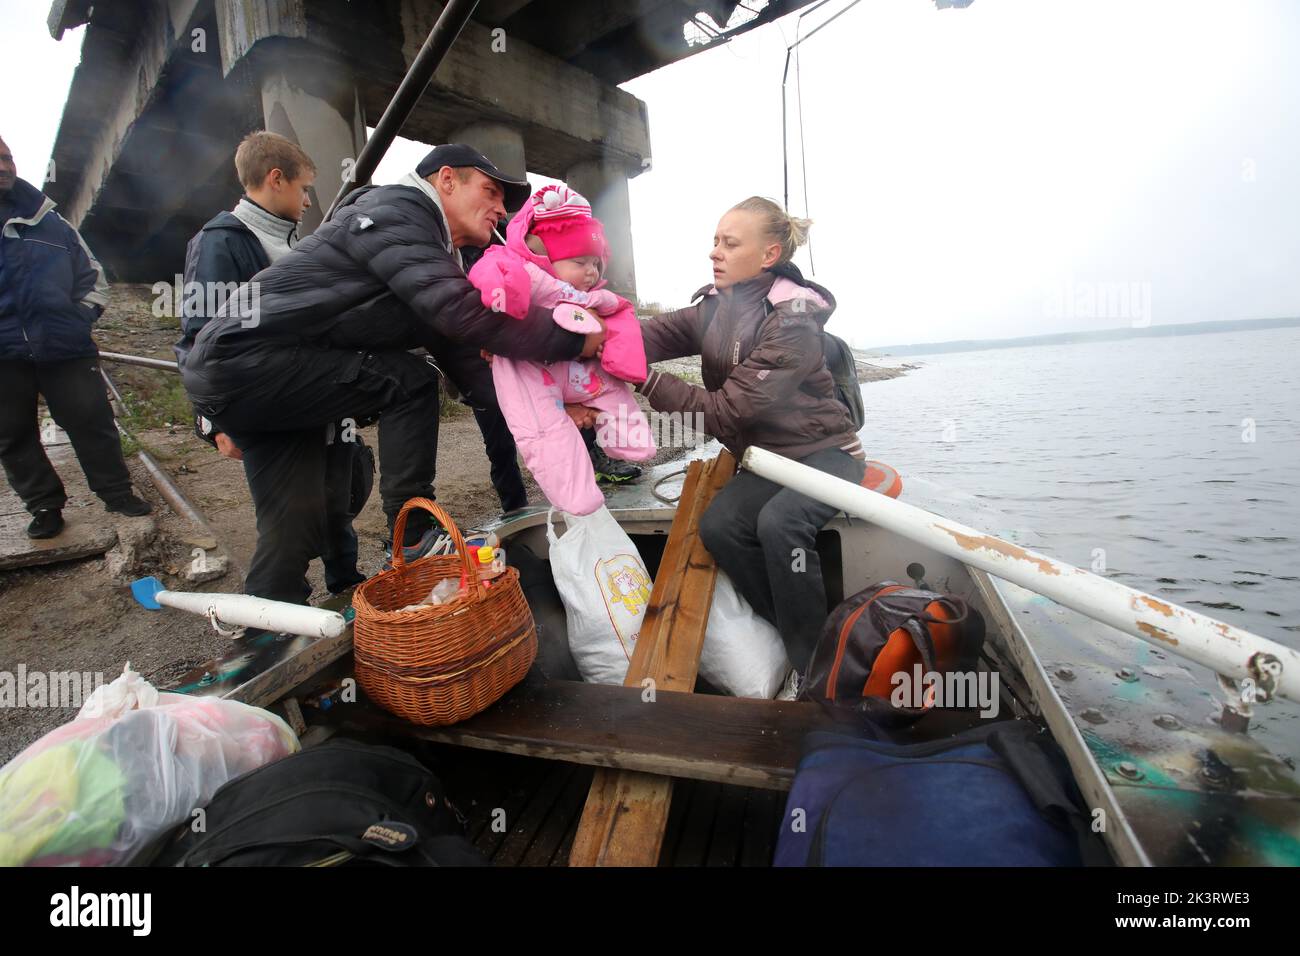 KHARKIV REGION, UKRAINE - SEPTEMBER 27, 2022 - A man passes a baby girl to a woman as Staryi Saltiv residents use a boat to get across the Pechenihy R Stock Photo